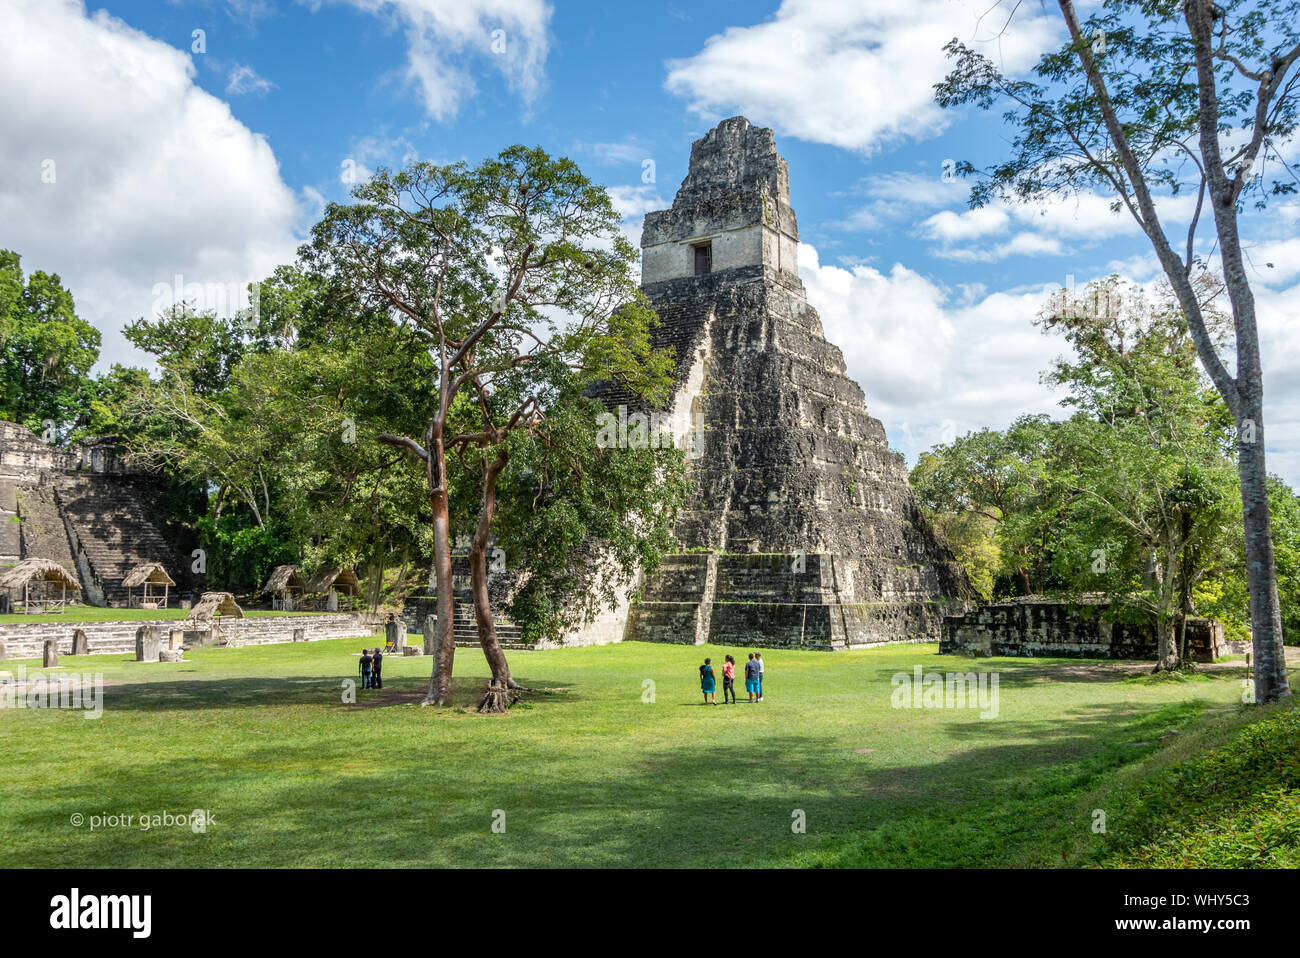 Temple I of the pre-Columbian Maya archaeological site of Tikal in Guatemala. Stock Photo